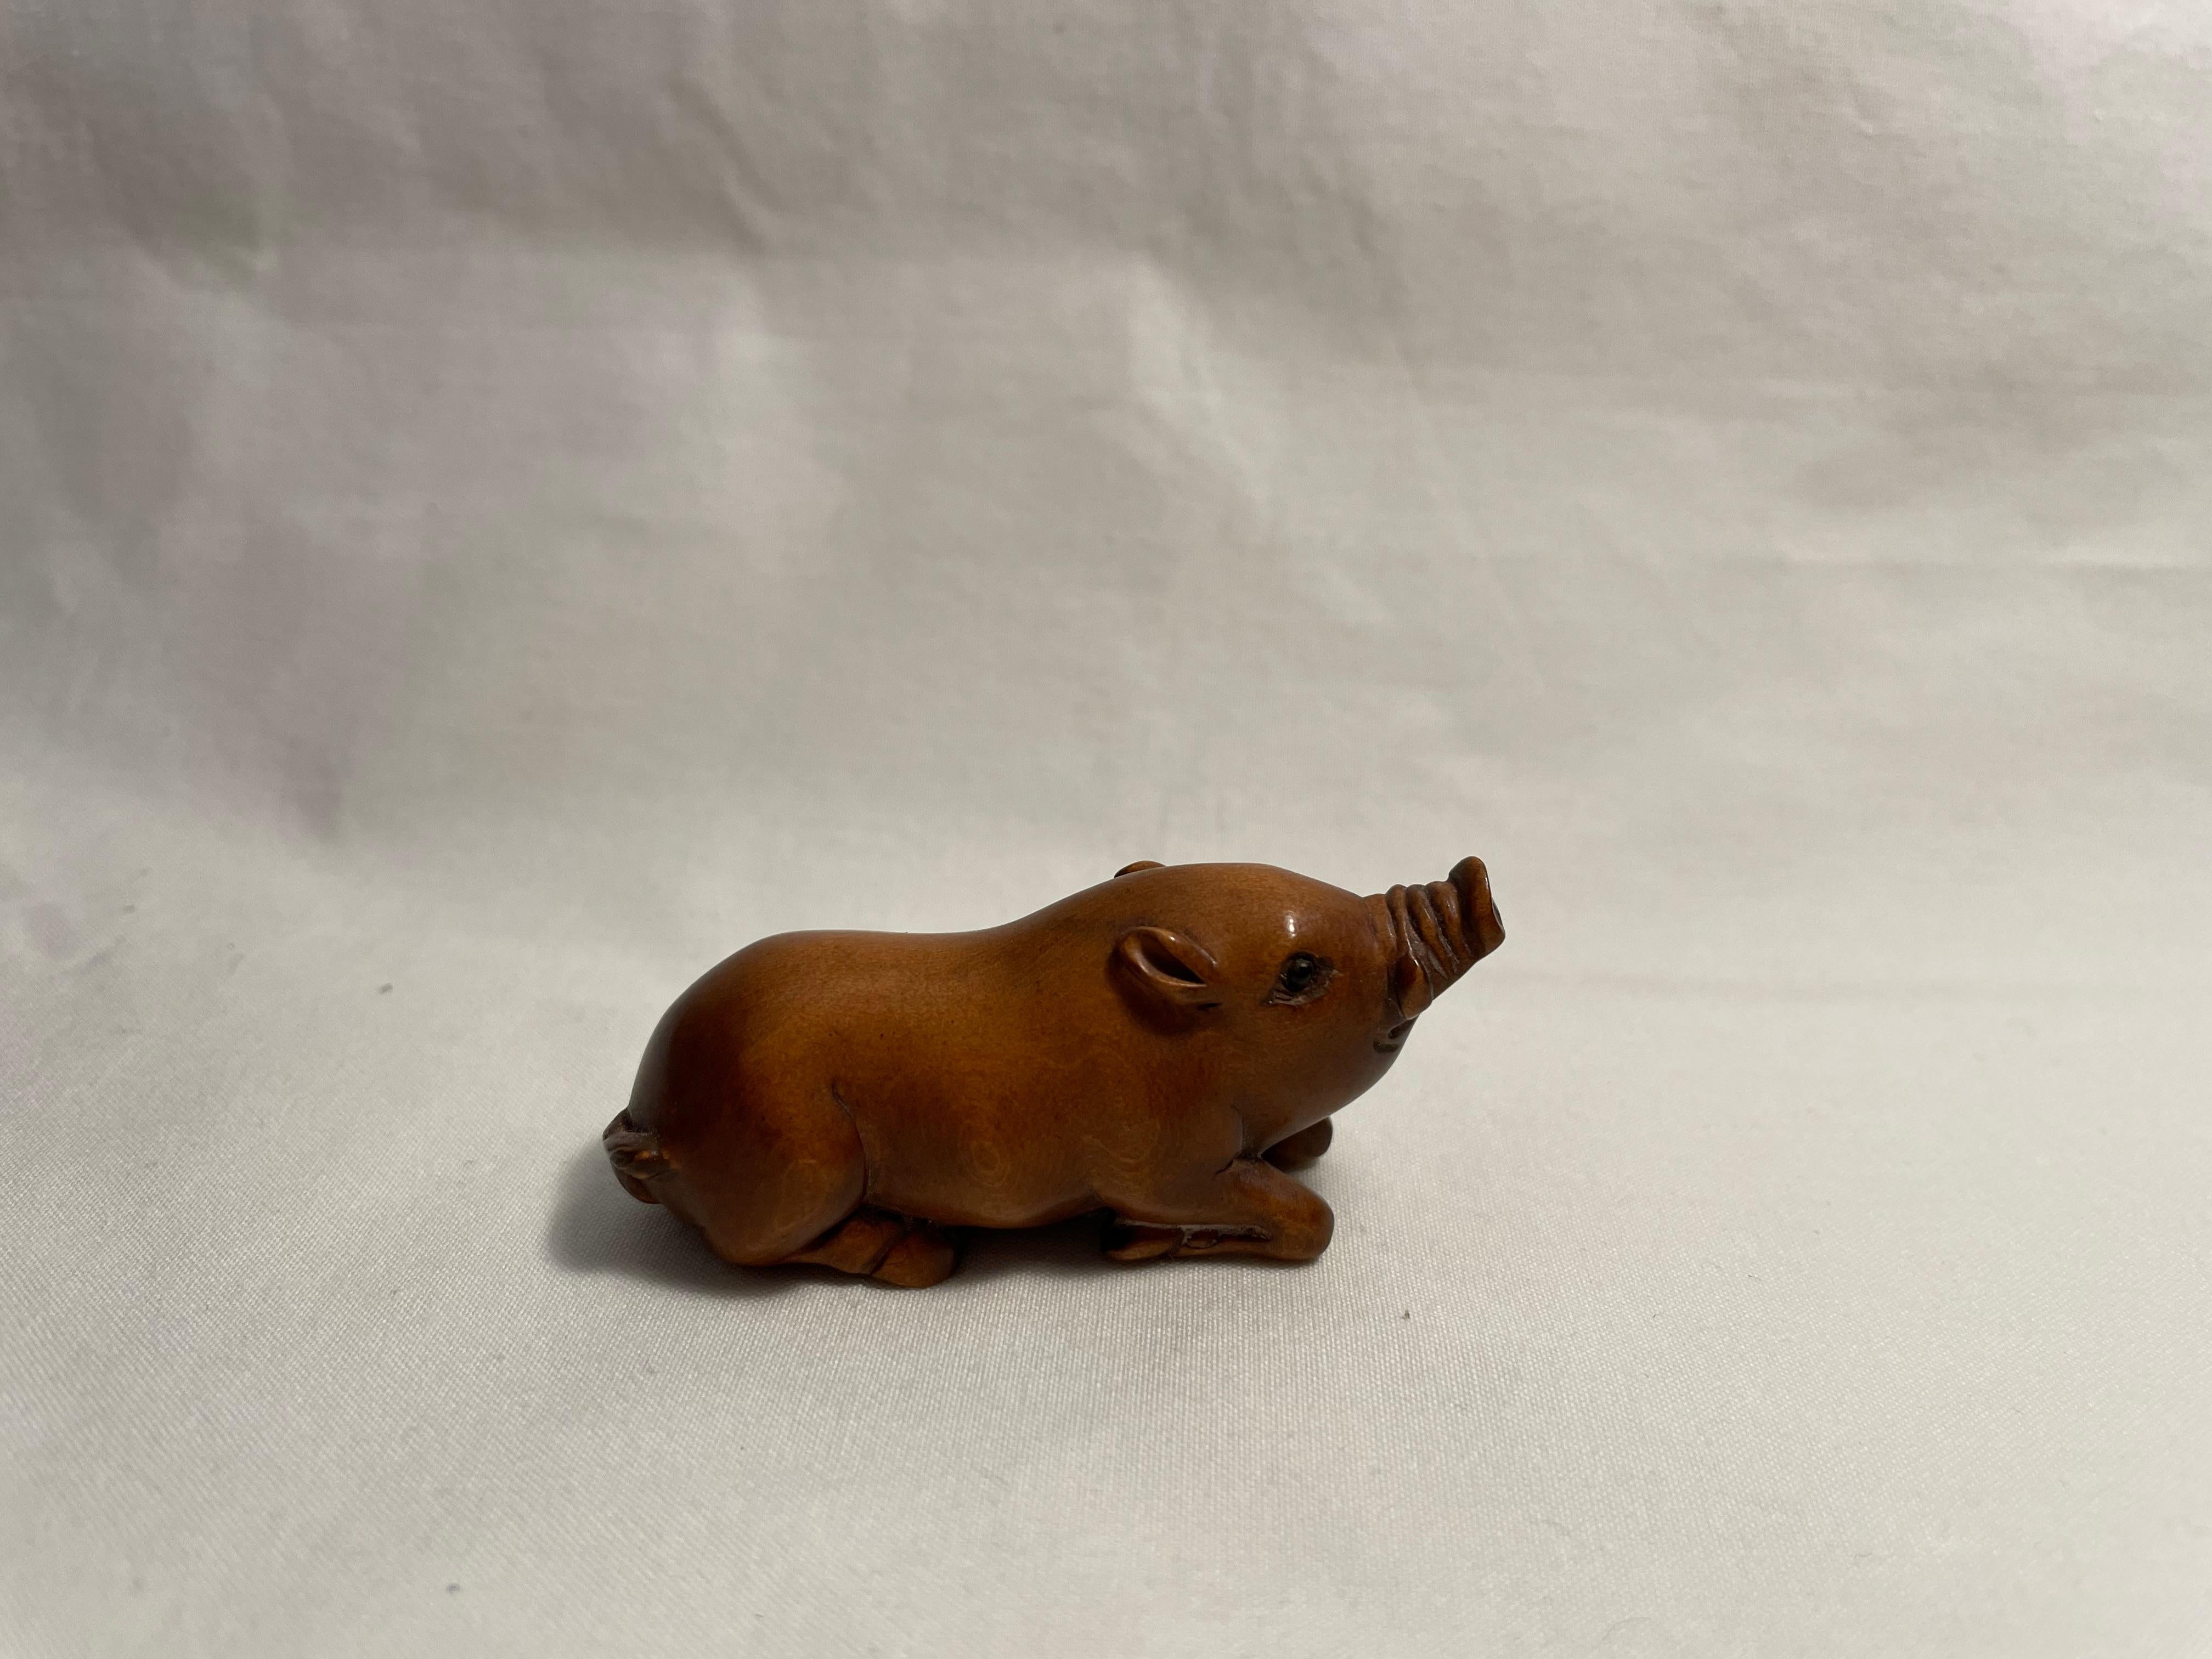 This is an antique netsuke made in Japan around Taisho period 1920s.
This netsuke was made by a netsuke artist 'Gyokuseki' (you can find his signature on the stomach of this pig netsuke.)
Netsuke is a miniature sculpture, originating in 17th